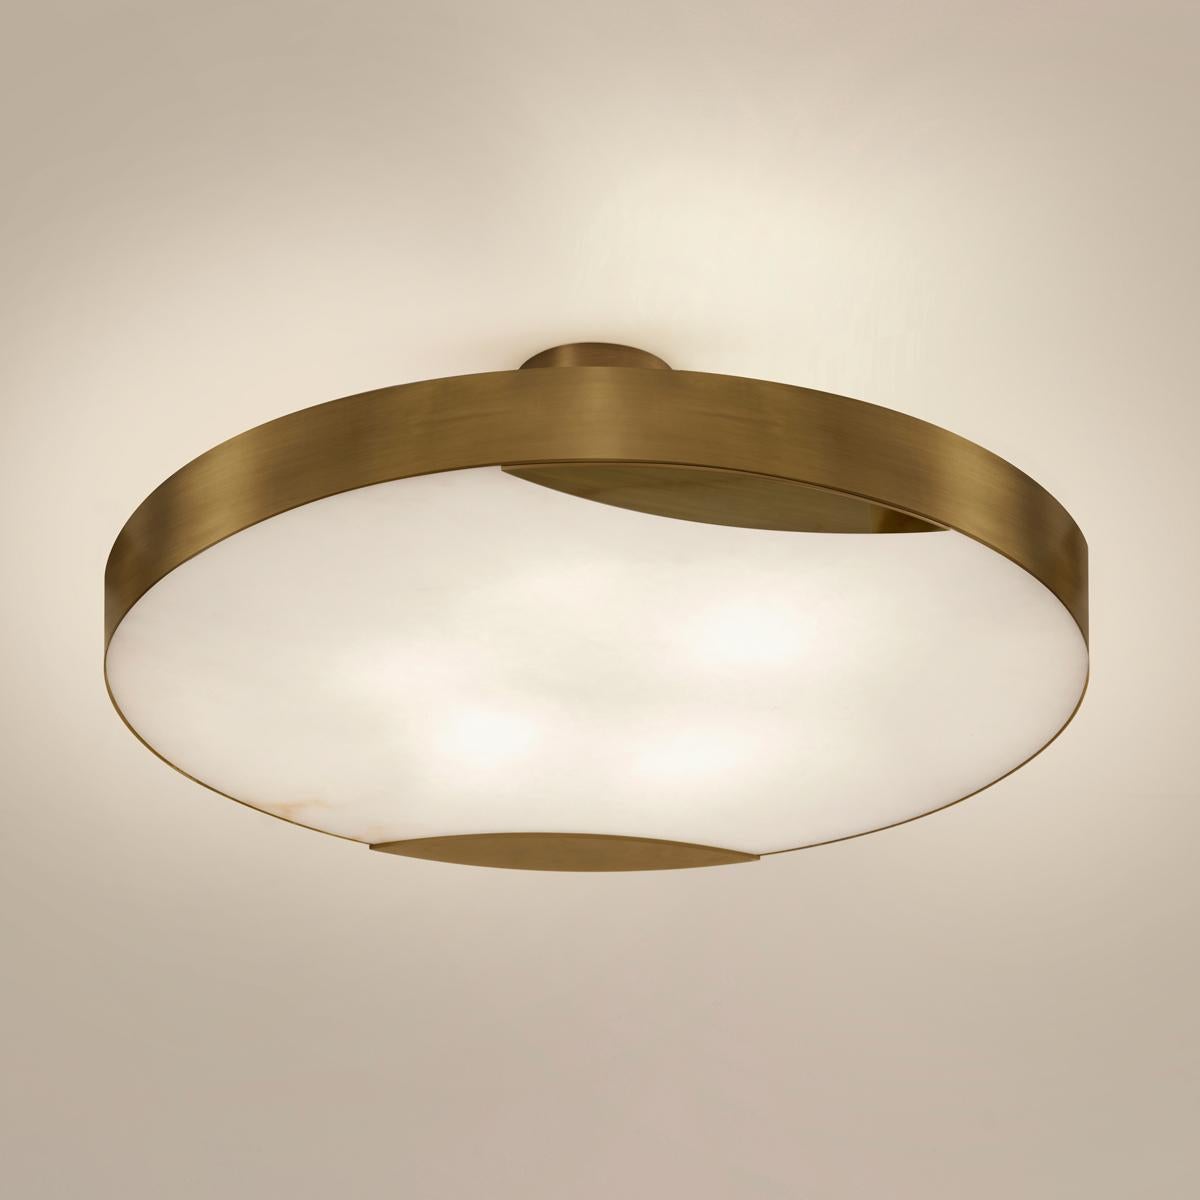 Cloud N.1 Ceiling Light by Gaspare Asaro-Polished Nickel Finish In New Condition For Sale In New York, NY